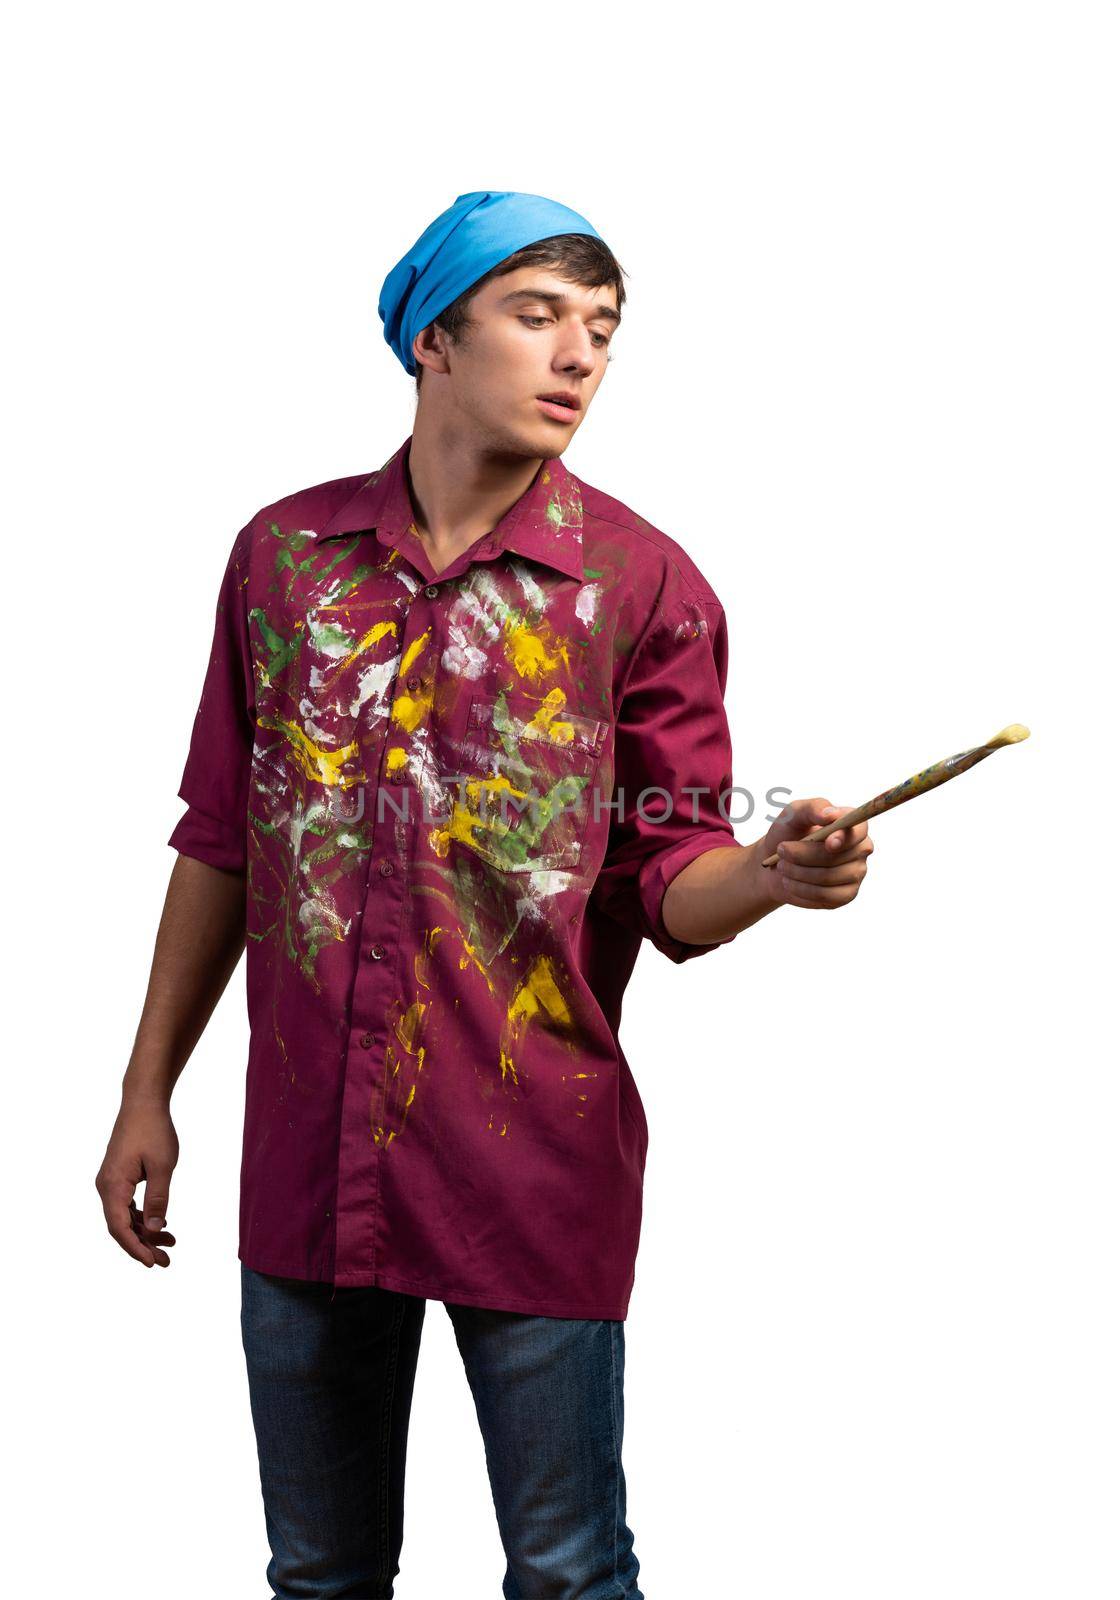 Young male painter artist holding paintbrush. Portrait of painter in dirty shirt and bandana standing on white background. Creative hobby and artistic occupation. Art school courses concept.